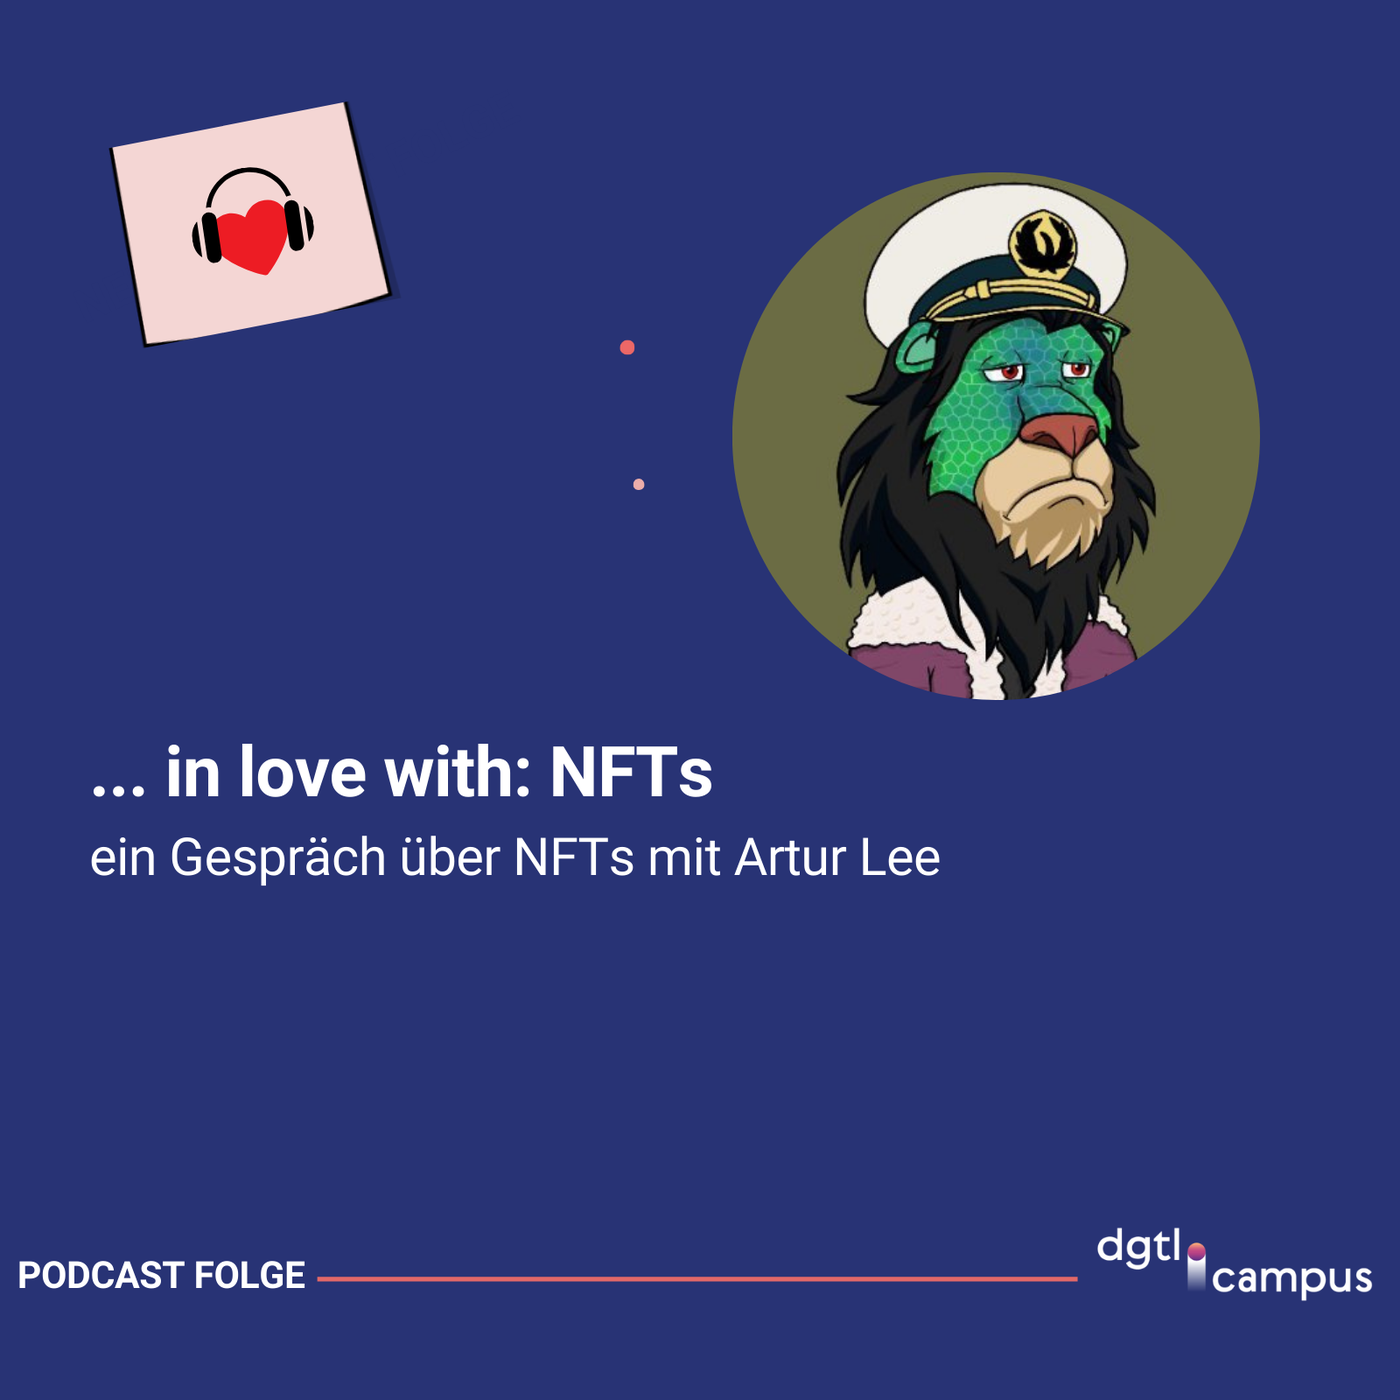 in love with ... NFTs